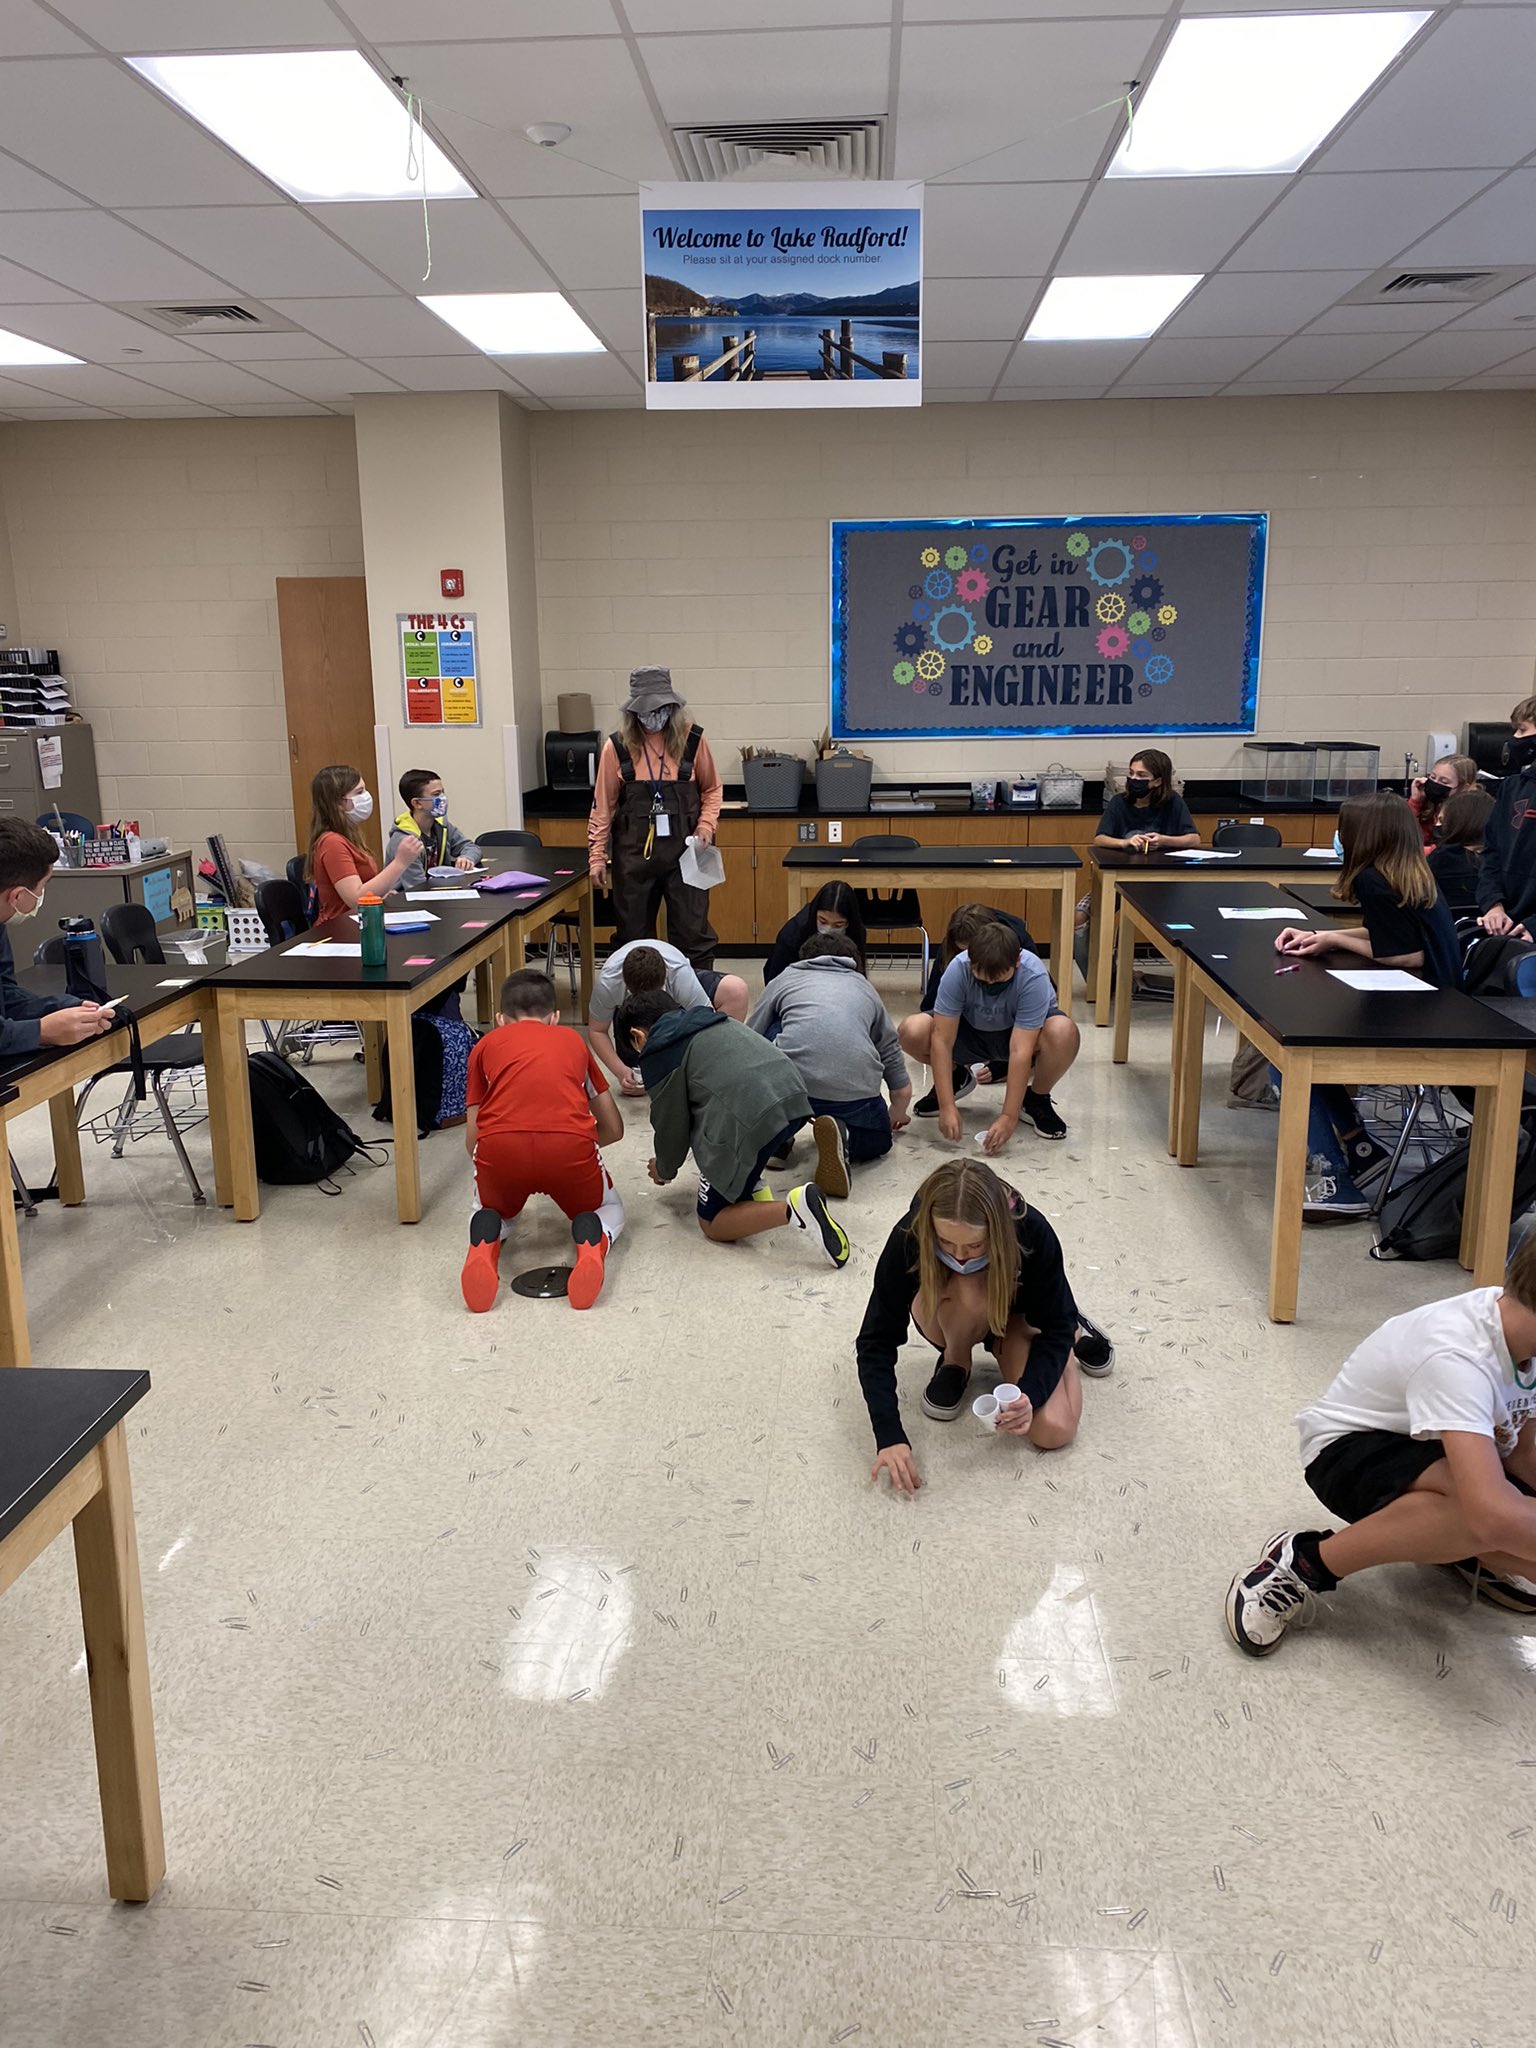 Chris Hynes on Twitter: "How are engineering, technology, science and  society interconnected? Leave it to Ms. Radford's STEM fishing simulation  to represent feeding a growing population. Great learning environment and a  great